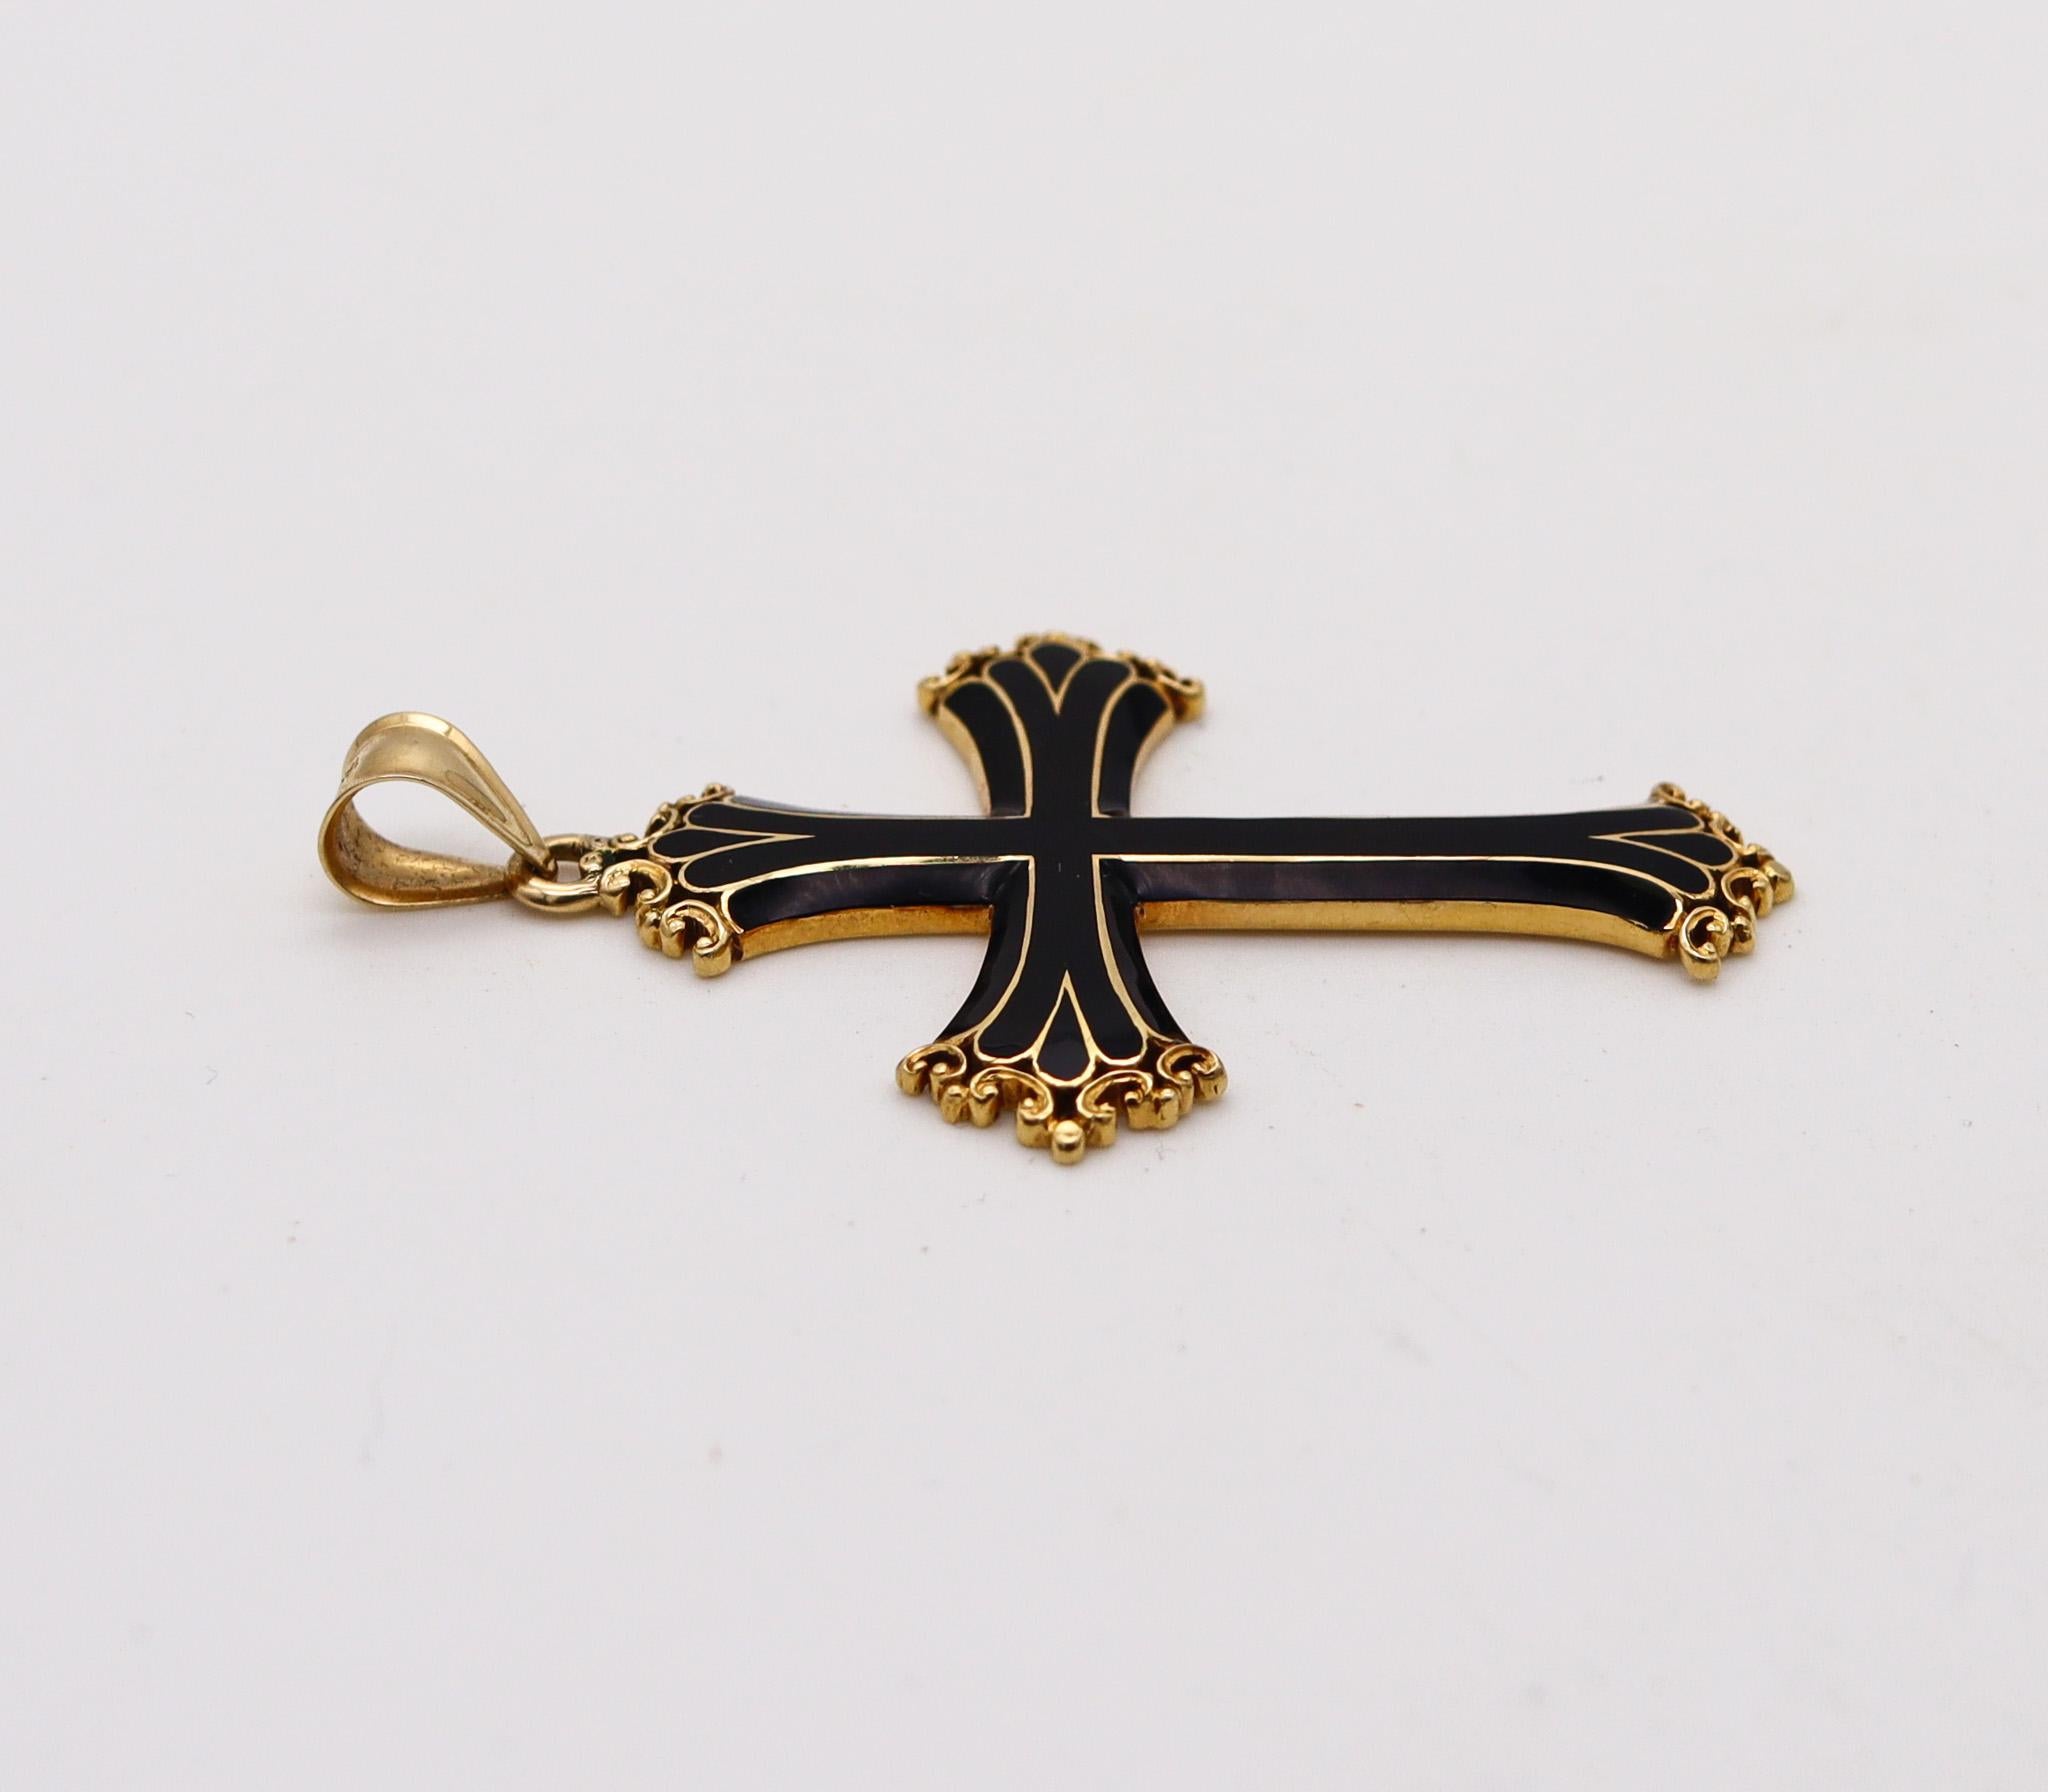 A neo-gothic enameled cross.

Very nice and unusual highly decorated cross designed in Italy with neo-gothic patterns. The vintage cross was crafted in solid rich yellow gold of 18 karats with high polished finish and embellished with applications